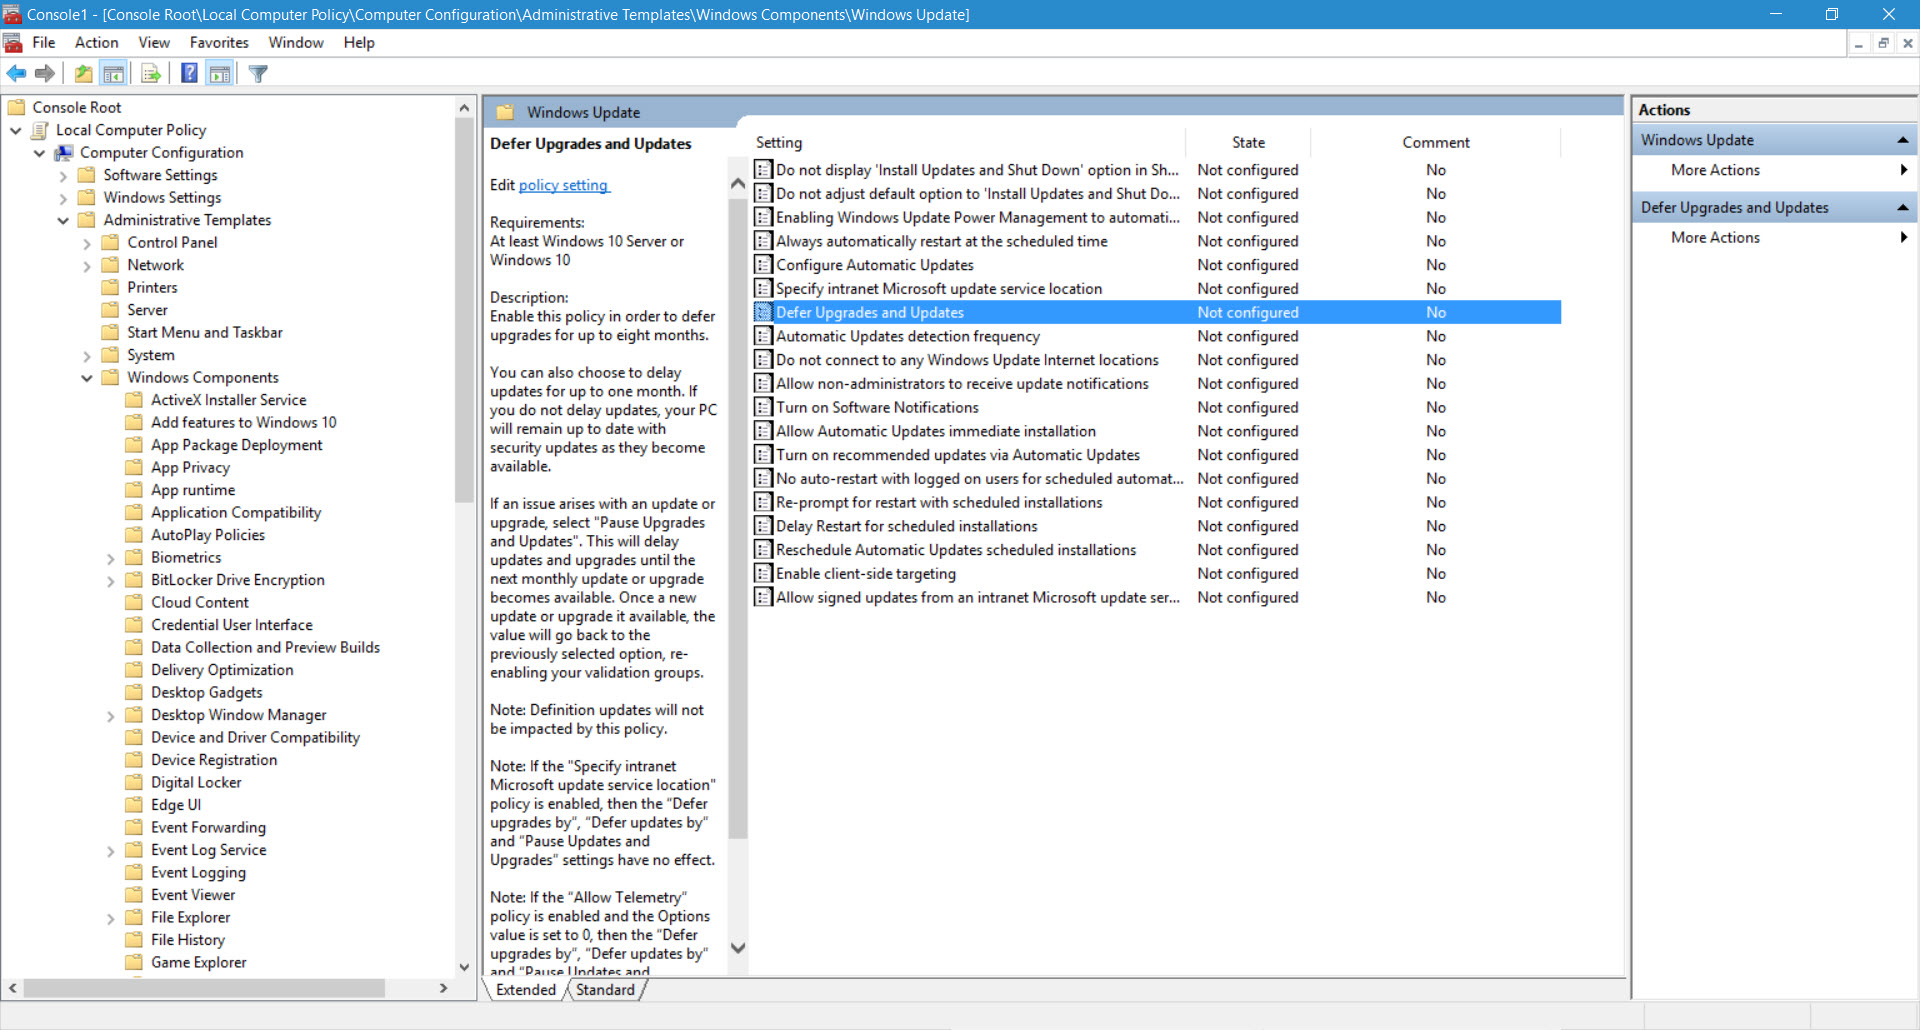 Configuring WSUS using Group Policy Object Editor (Image Credit: Russell Smith)